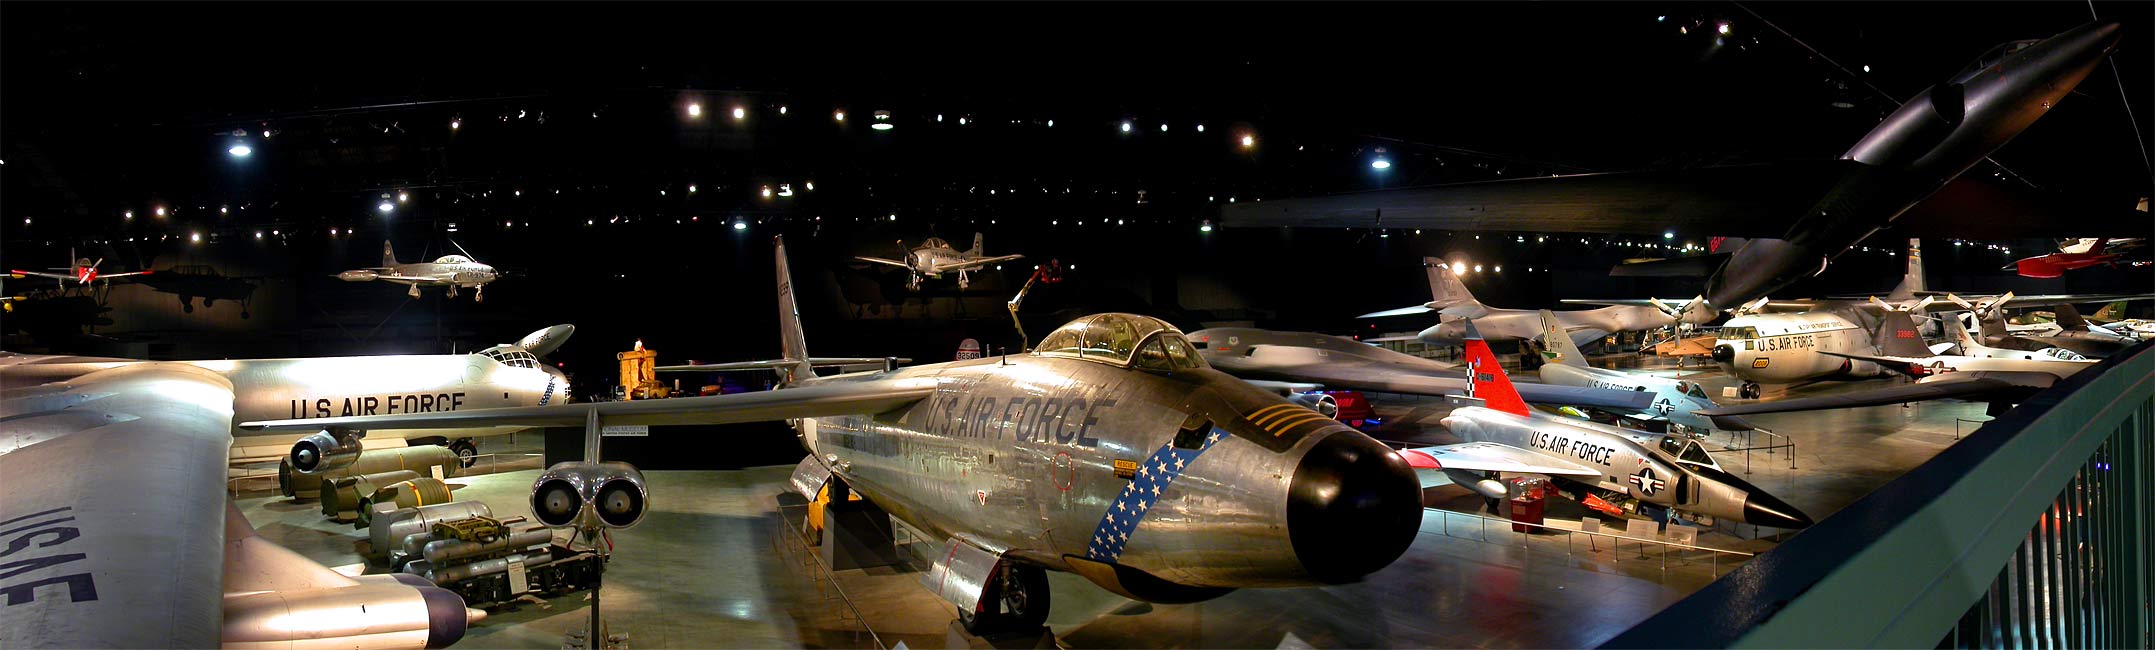 US Air Force Museum Cold War Gallery Panorama Photo